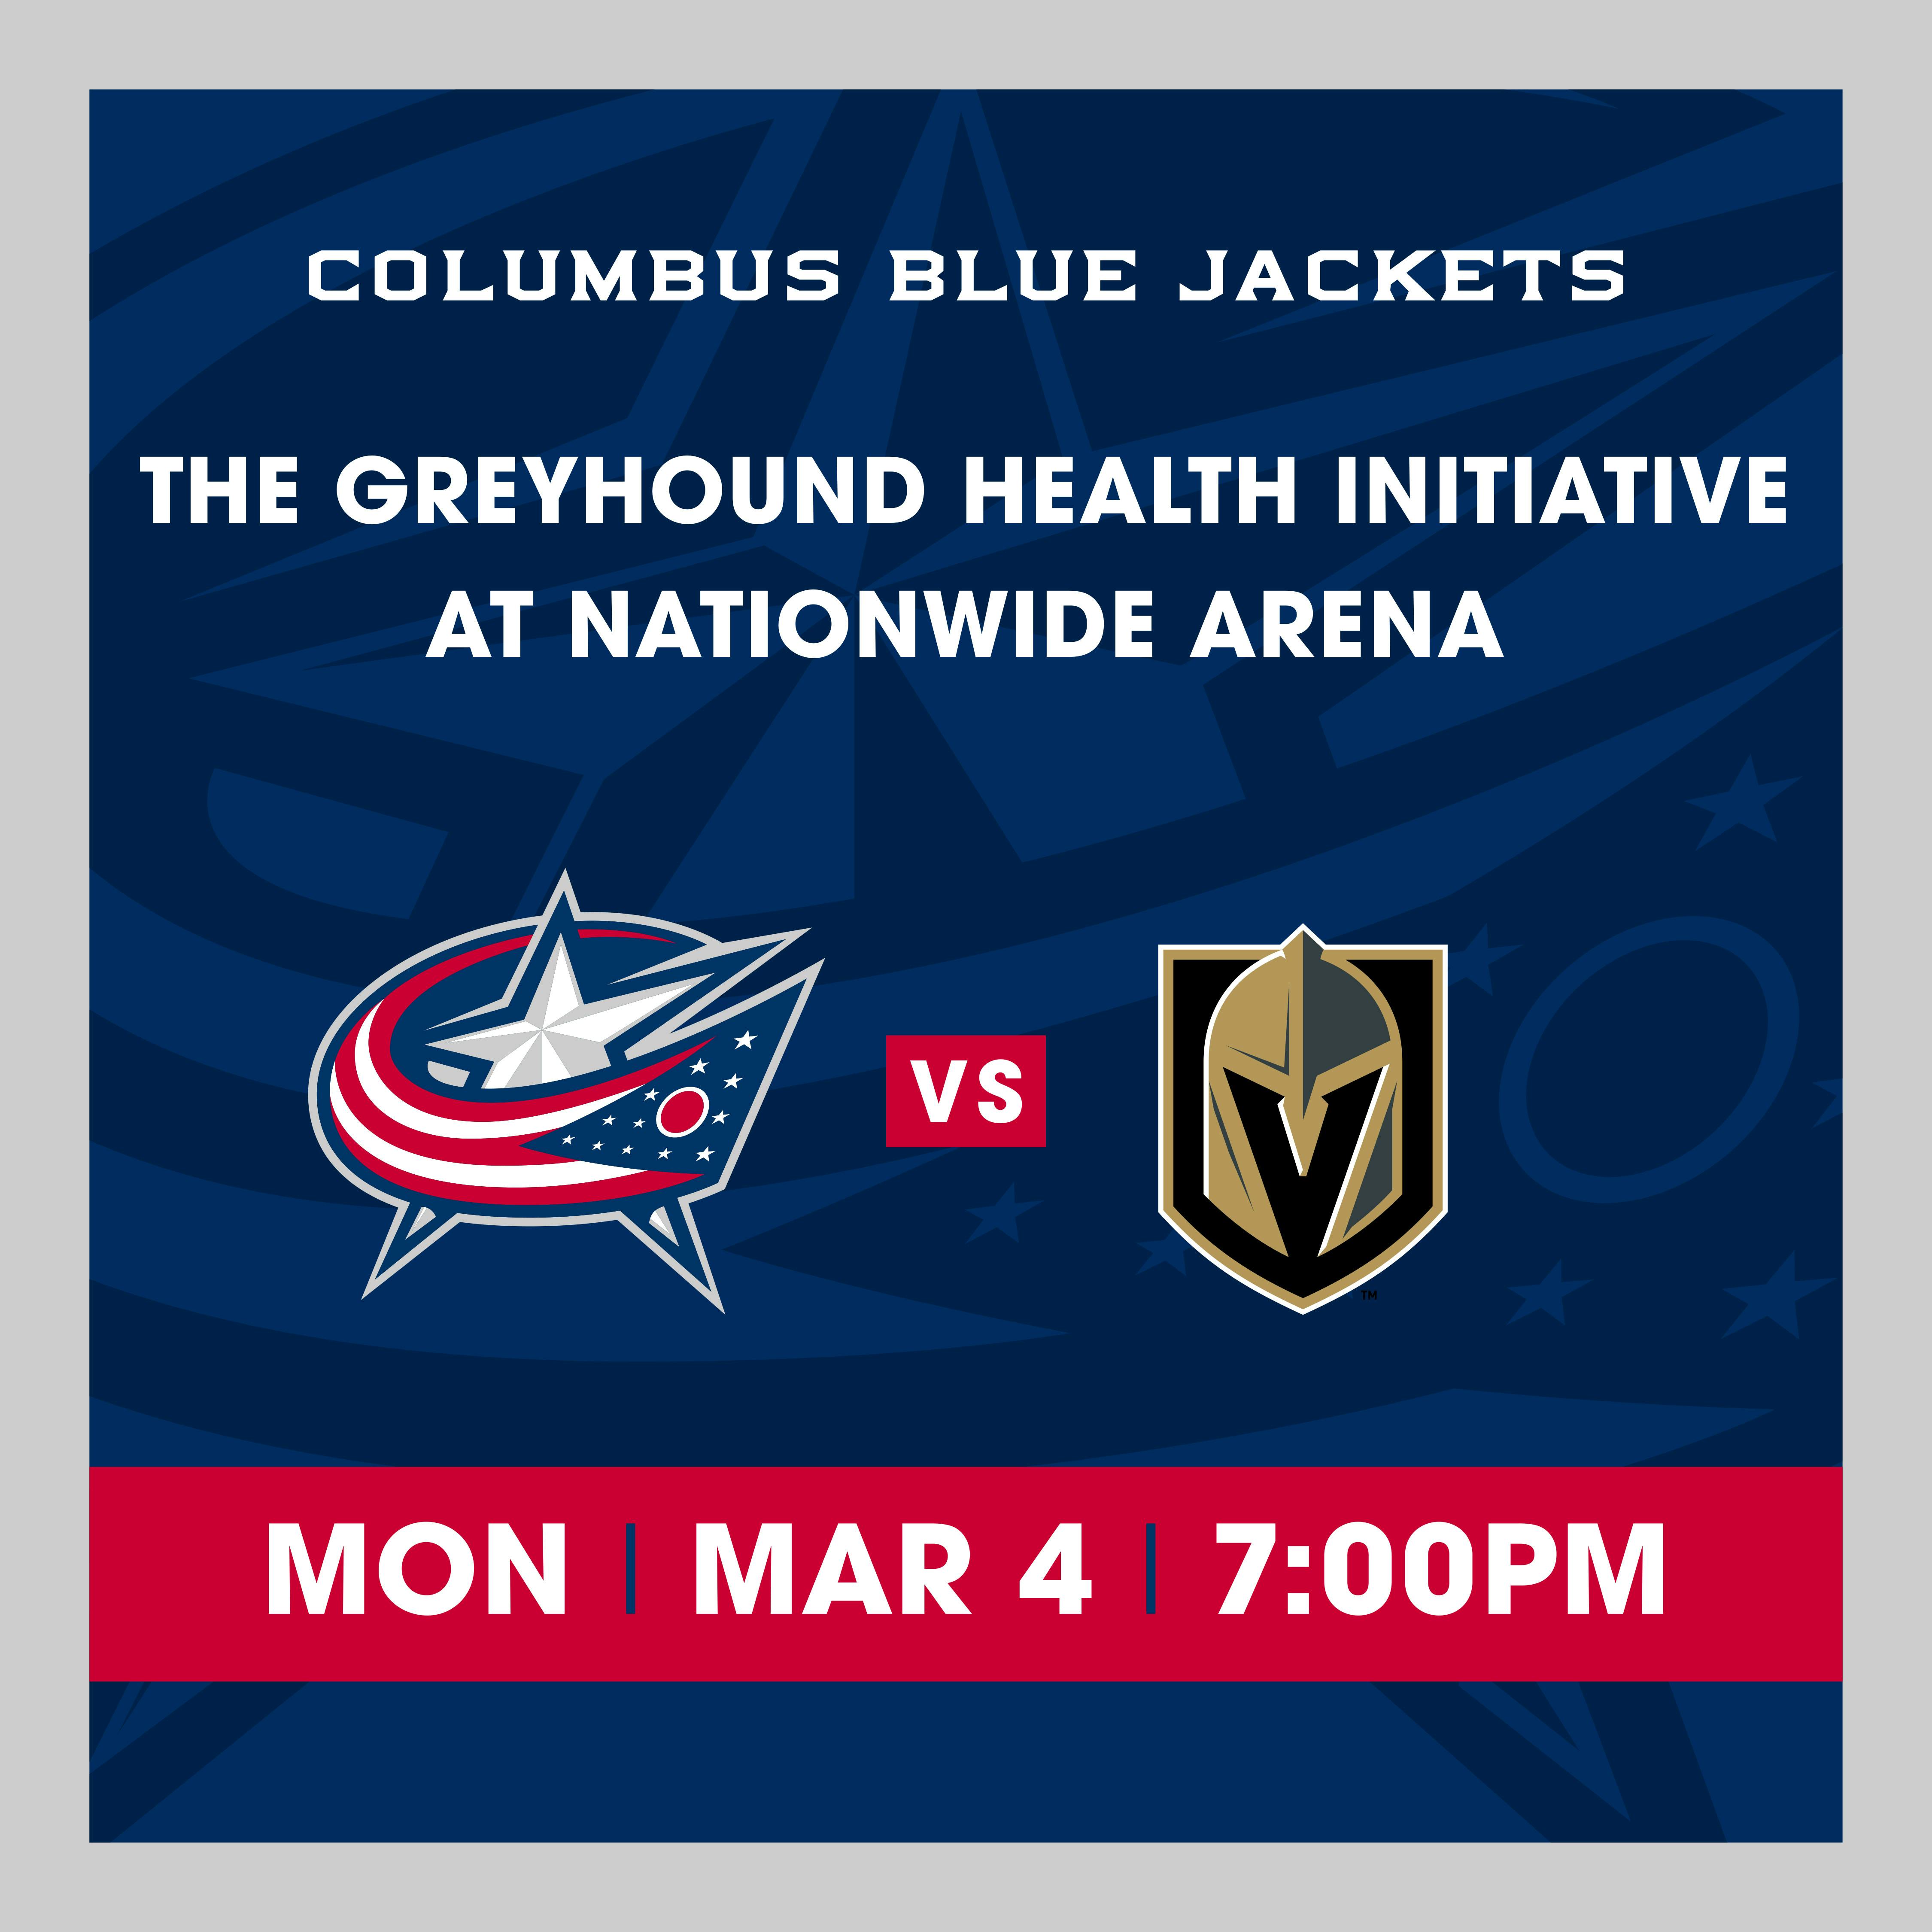 Join CBJ & the GHI Blood Bank for a game on March 4th!